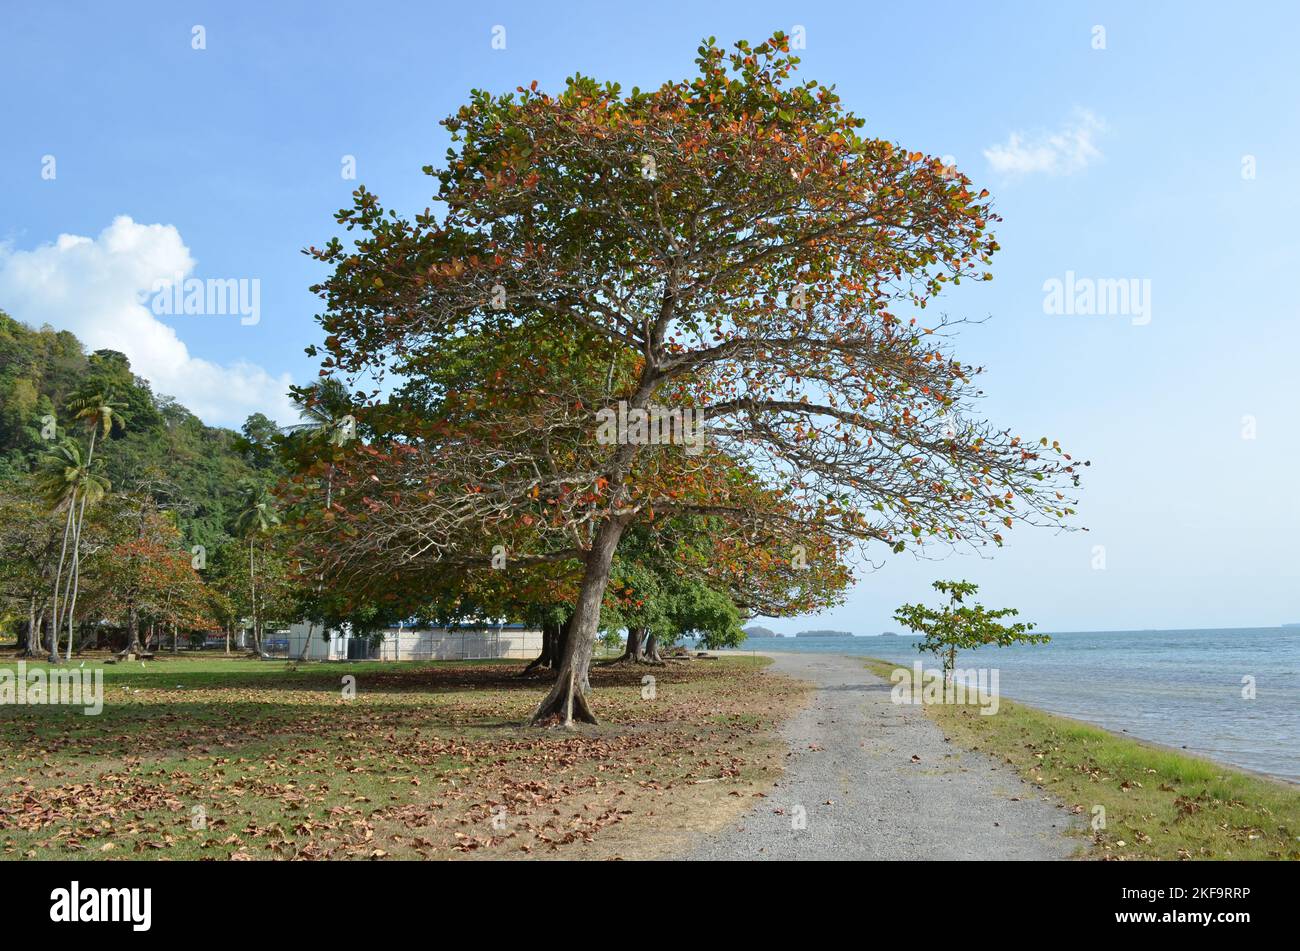 A Caribbean seaside bay and walkway in the town of Chaguaramas, Trinidad and Tobago Stock Photo